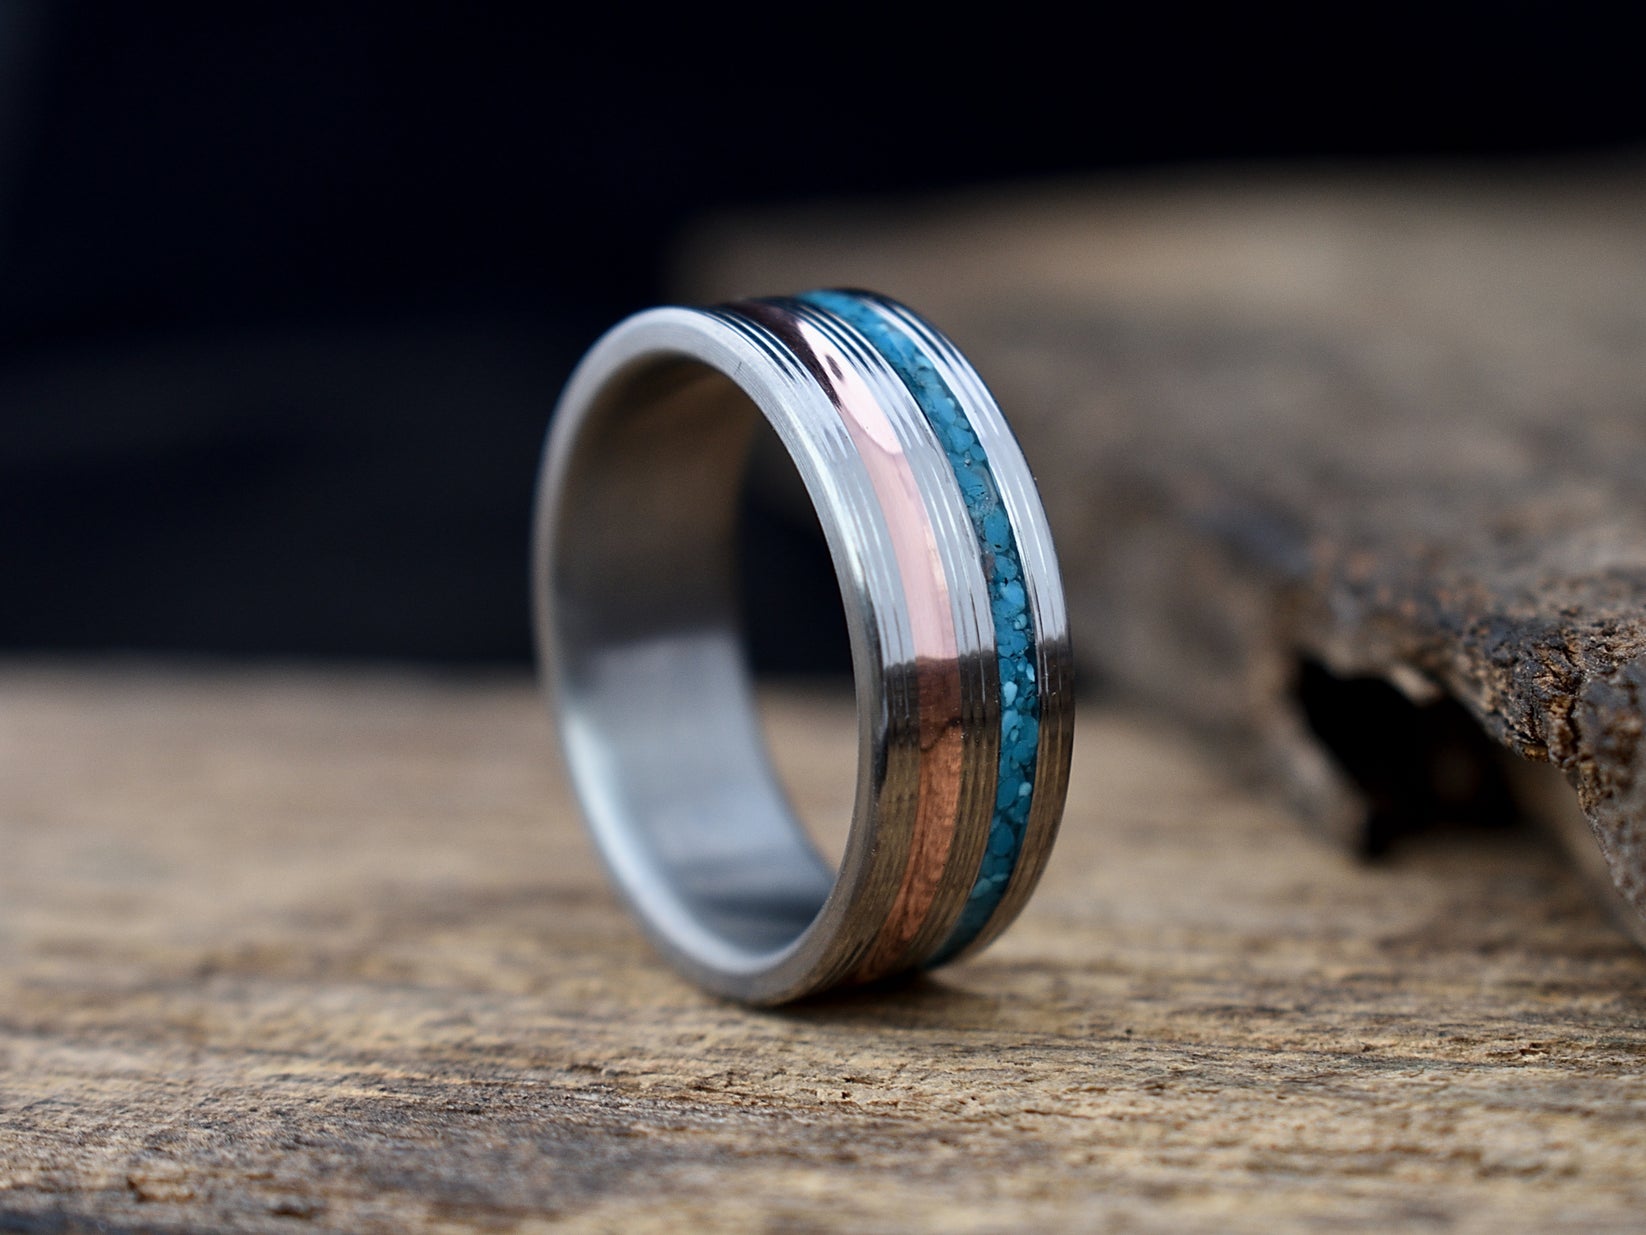 Paradox - Copper and Turquoise Inlay Men's Ring – Richter Scale Rings